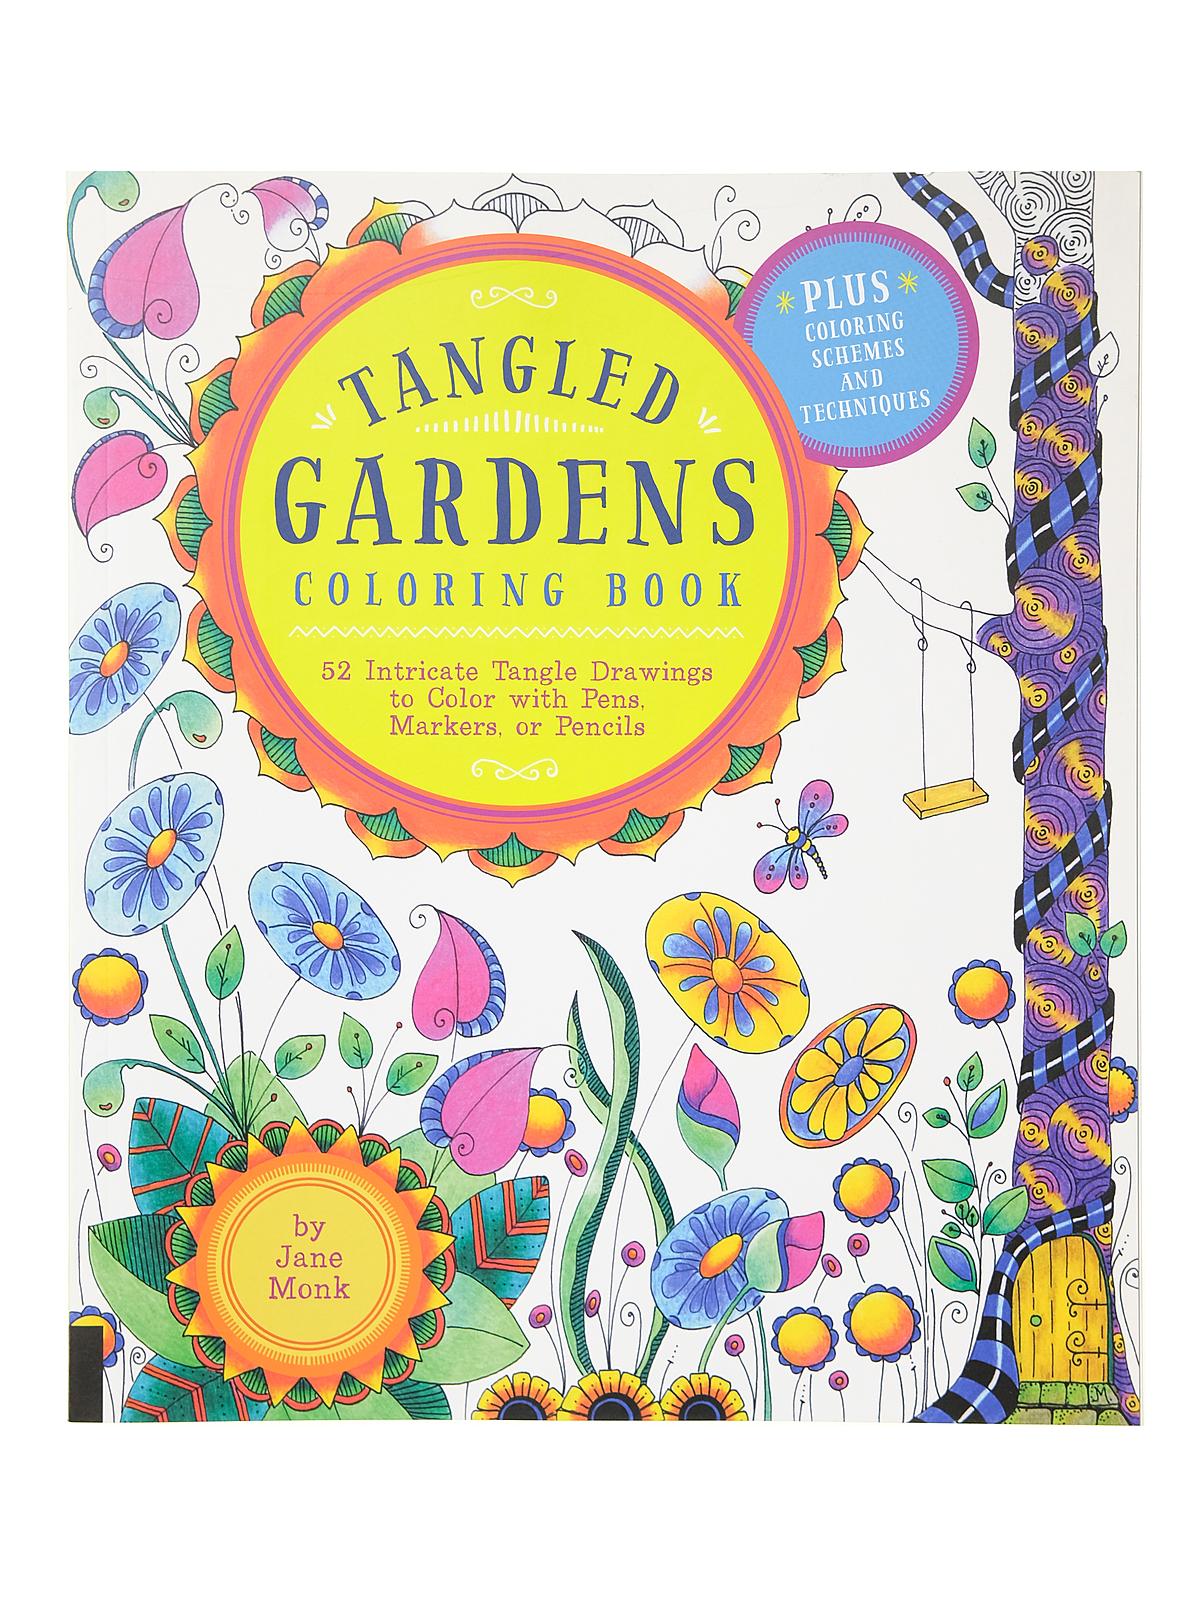 Tangled Gardens Coloring Book Each